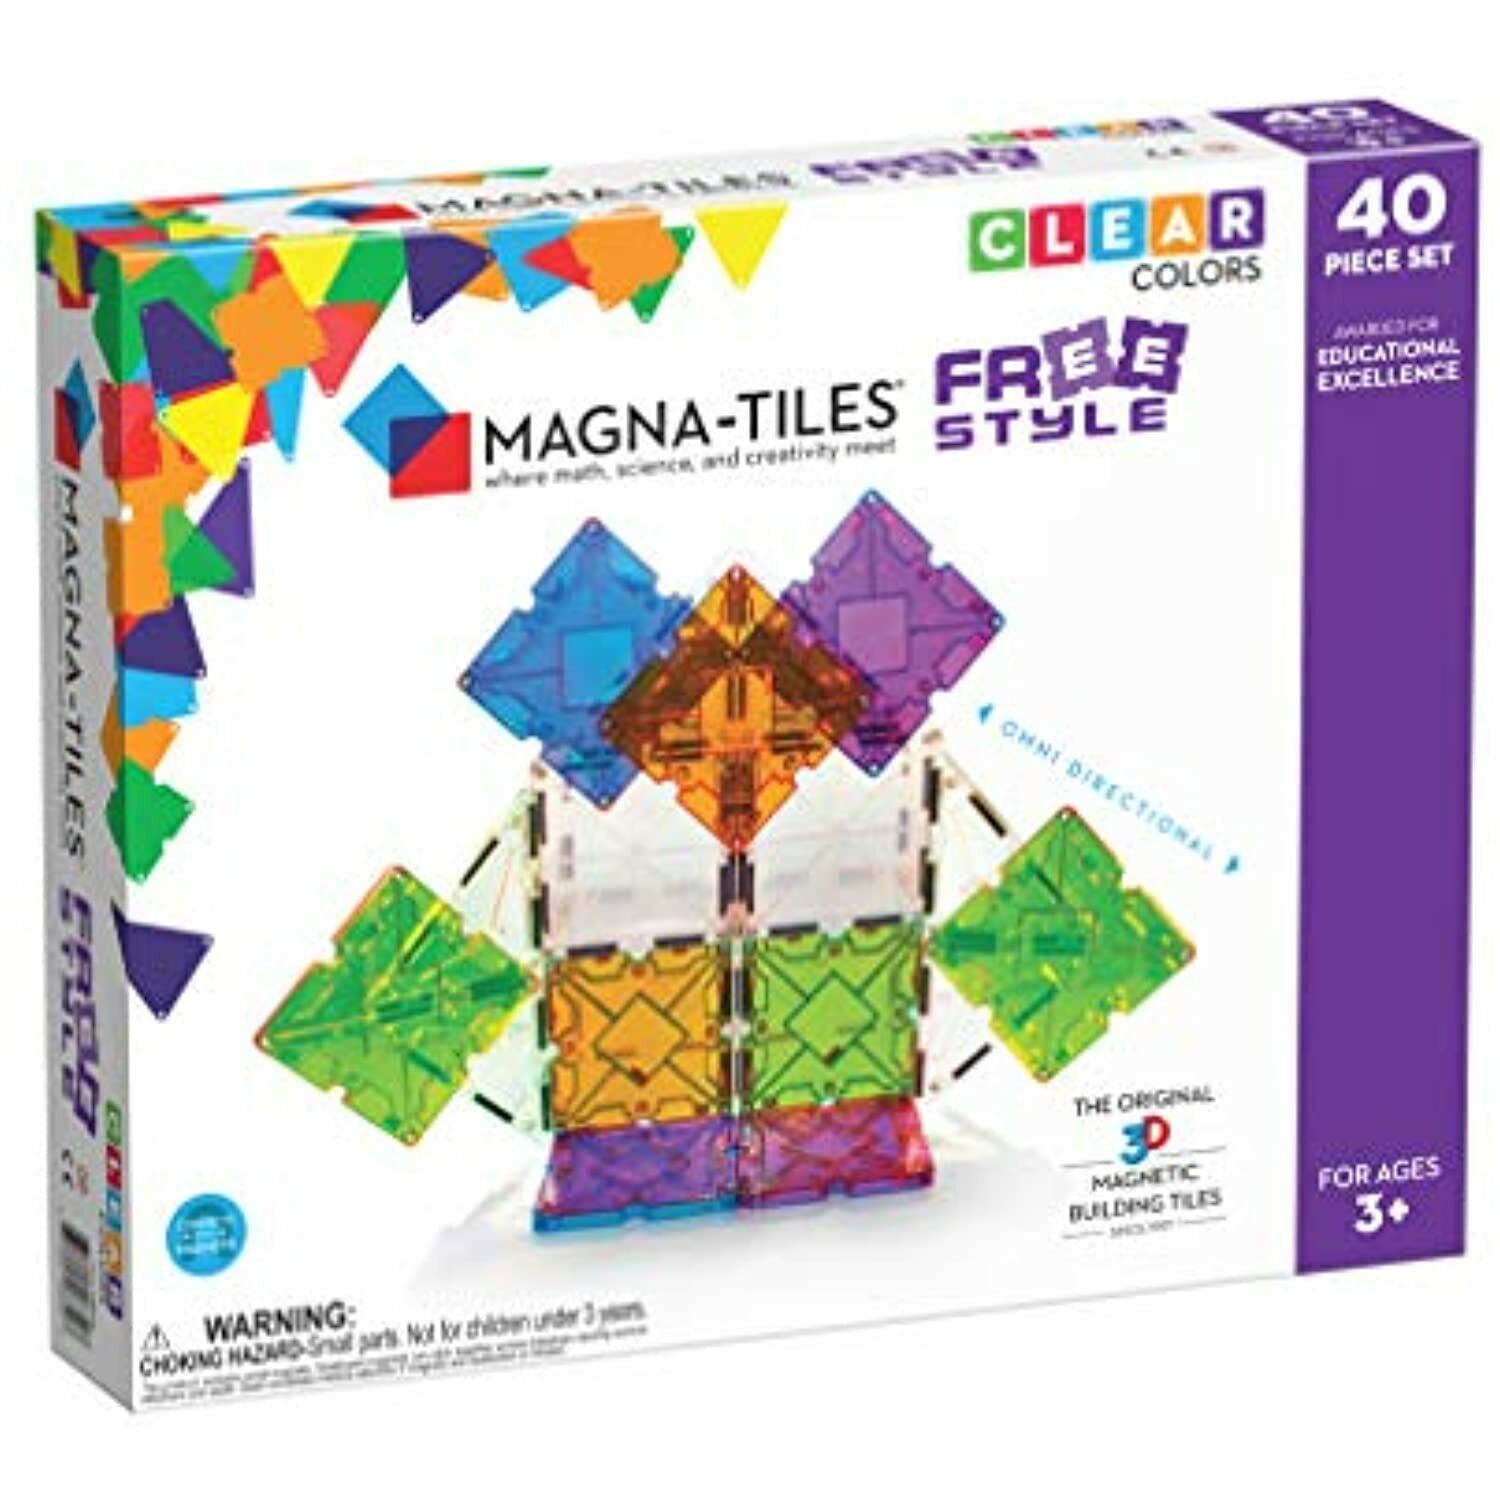 Magna-Tiles Freestyle Set, The Original Magnetic Building Tiles For Creative